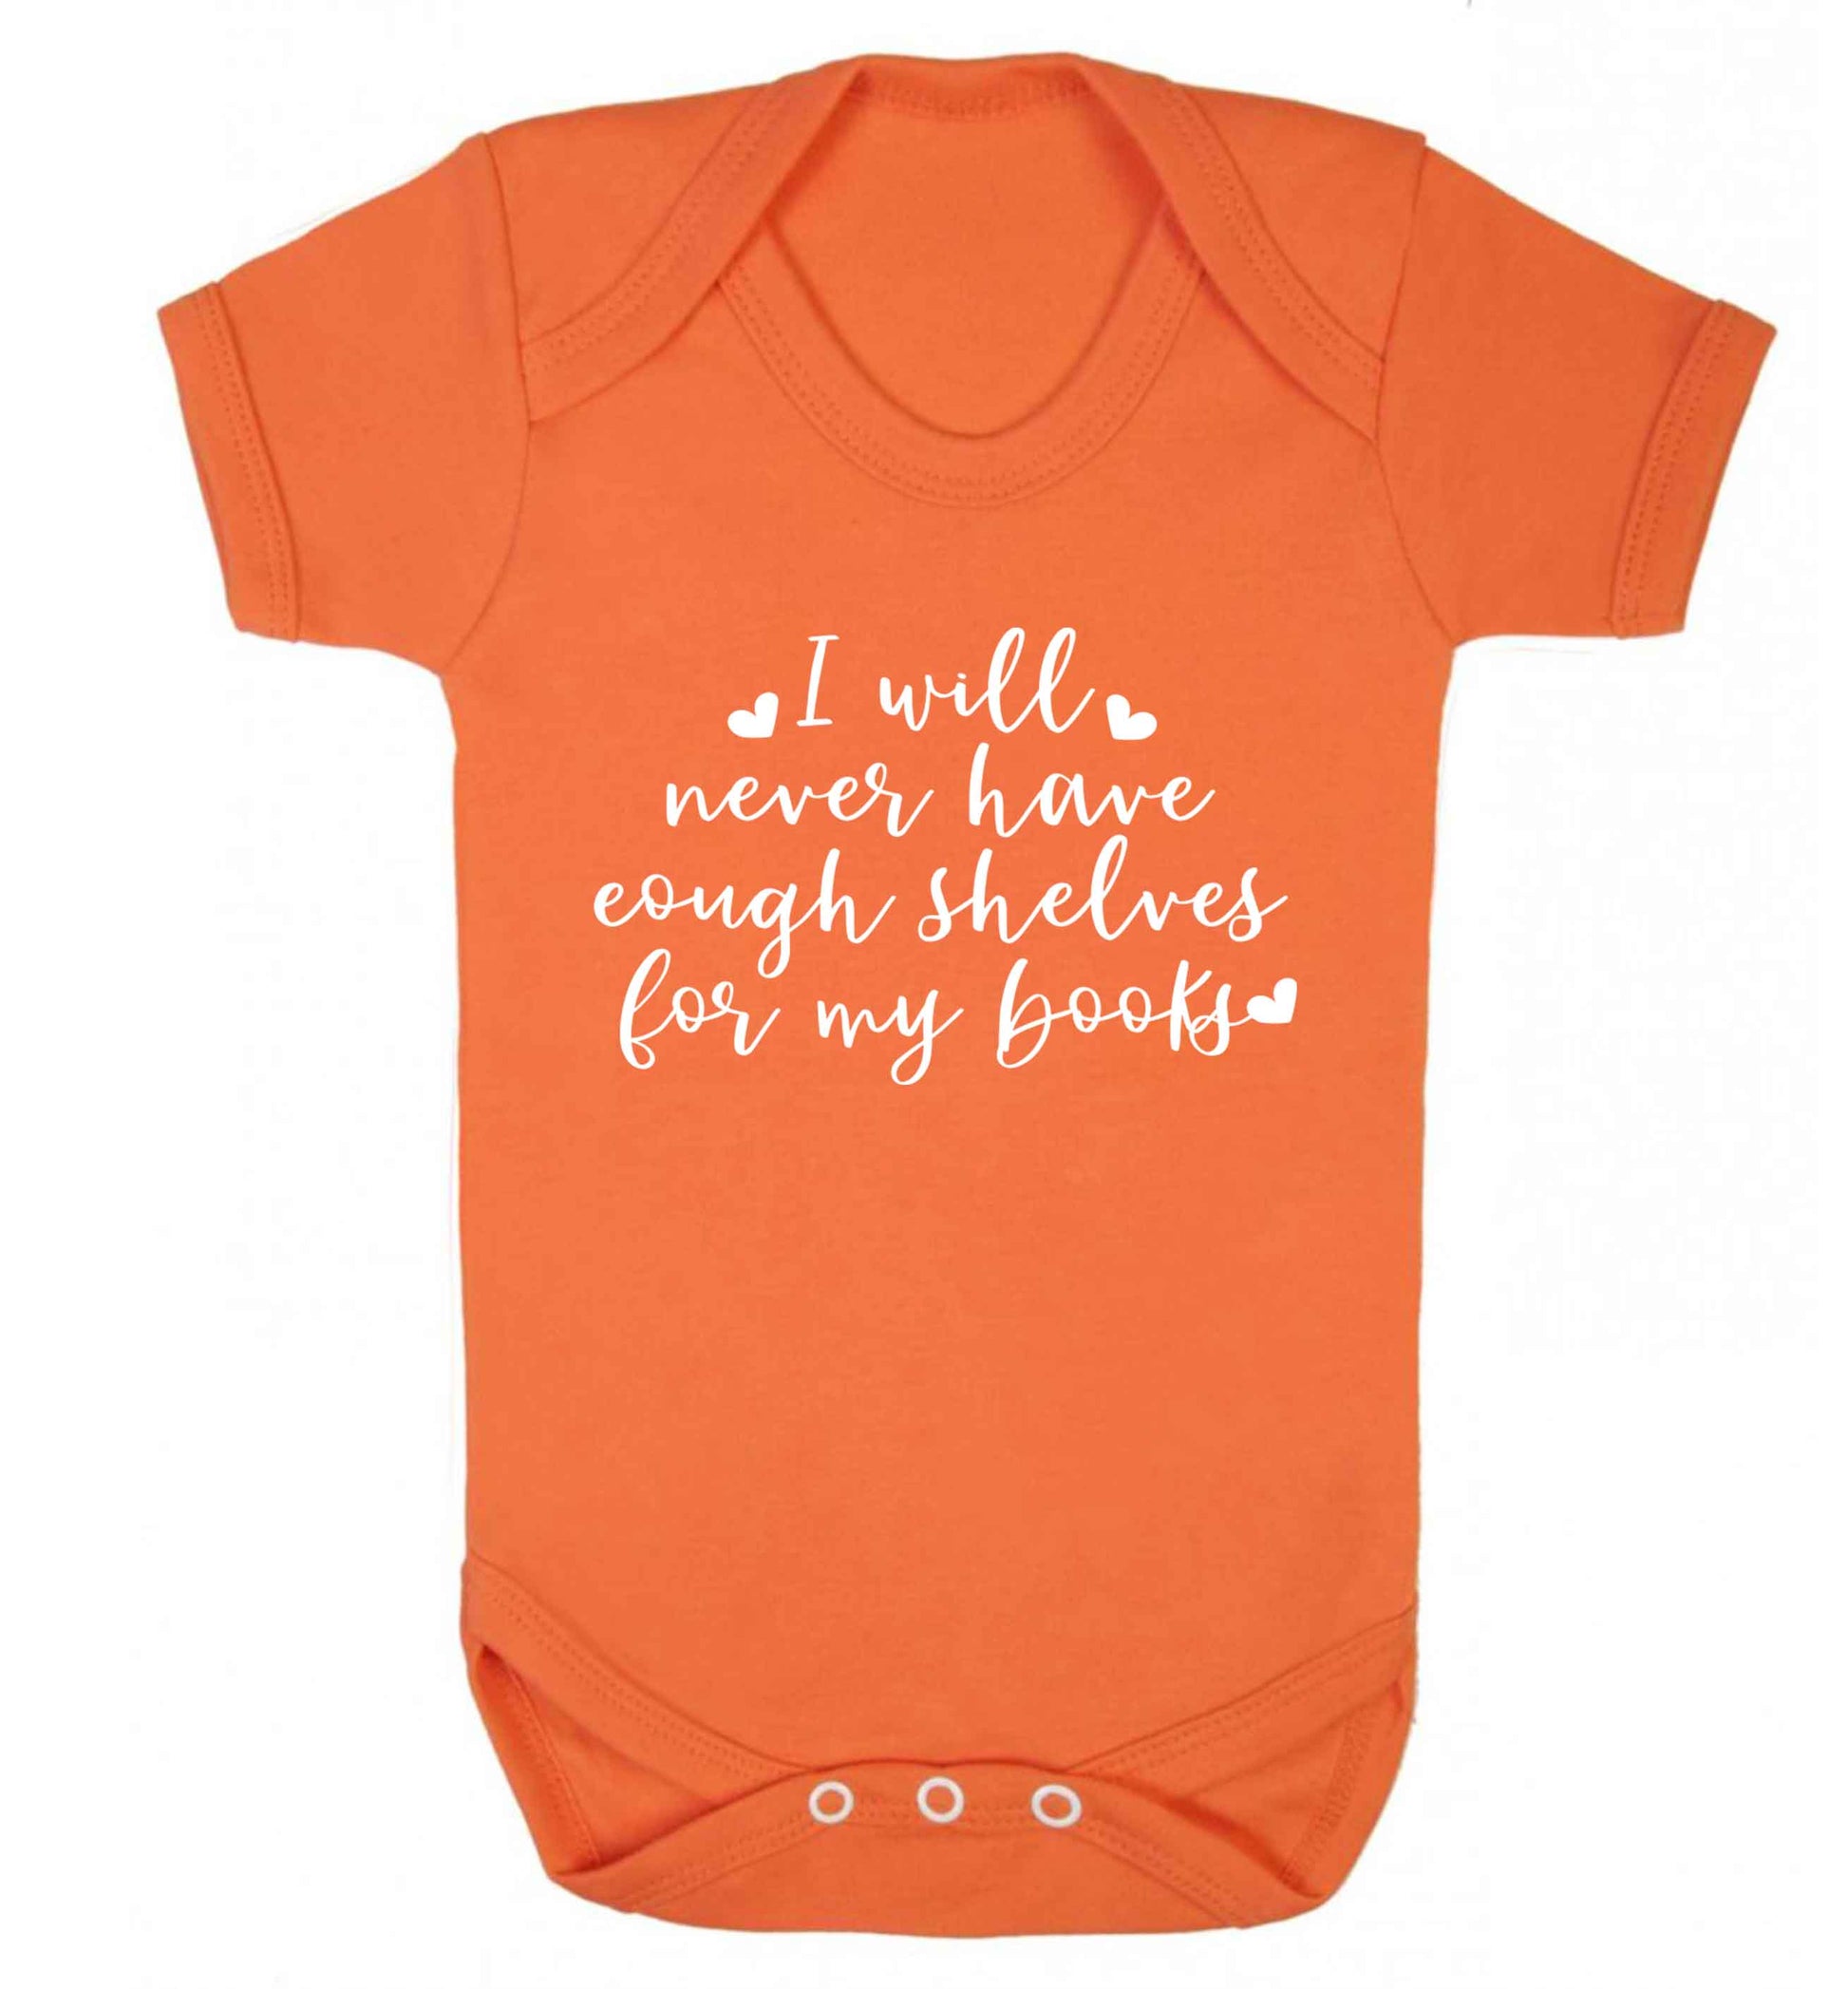 I will never have enough shelves for my books Baby Vest orange 18-24 months